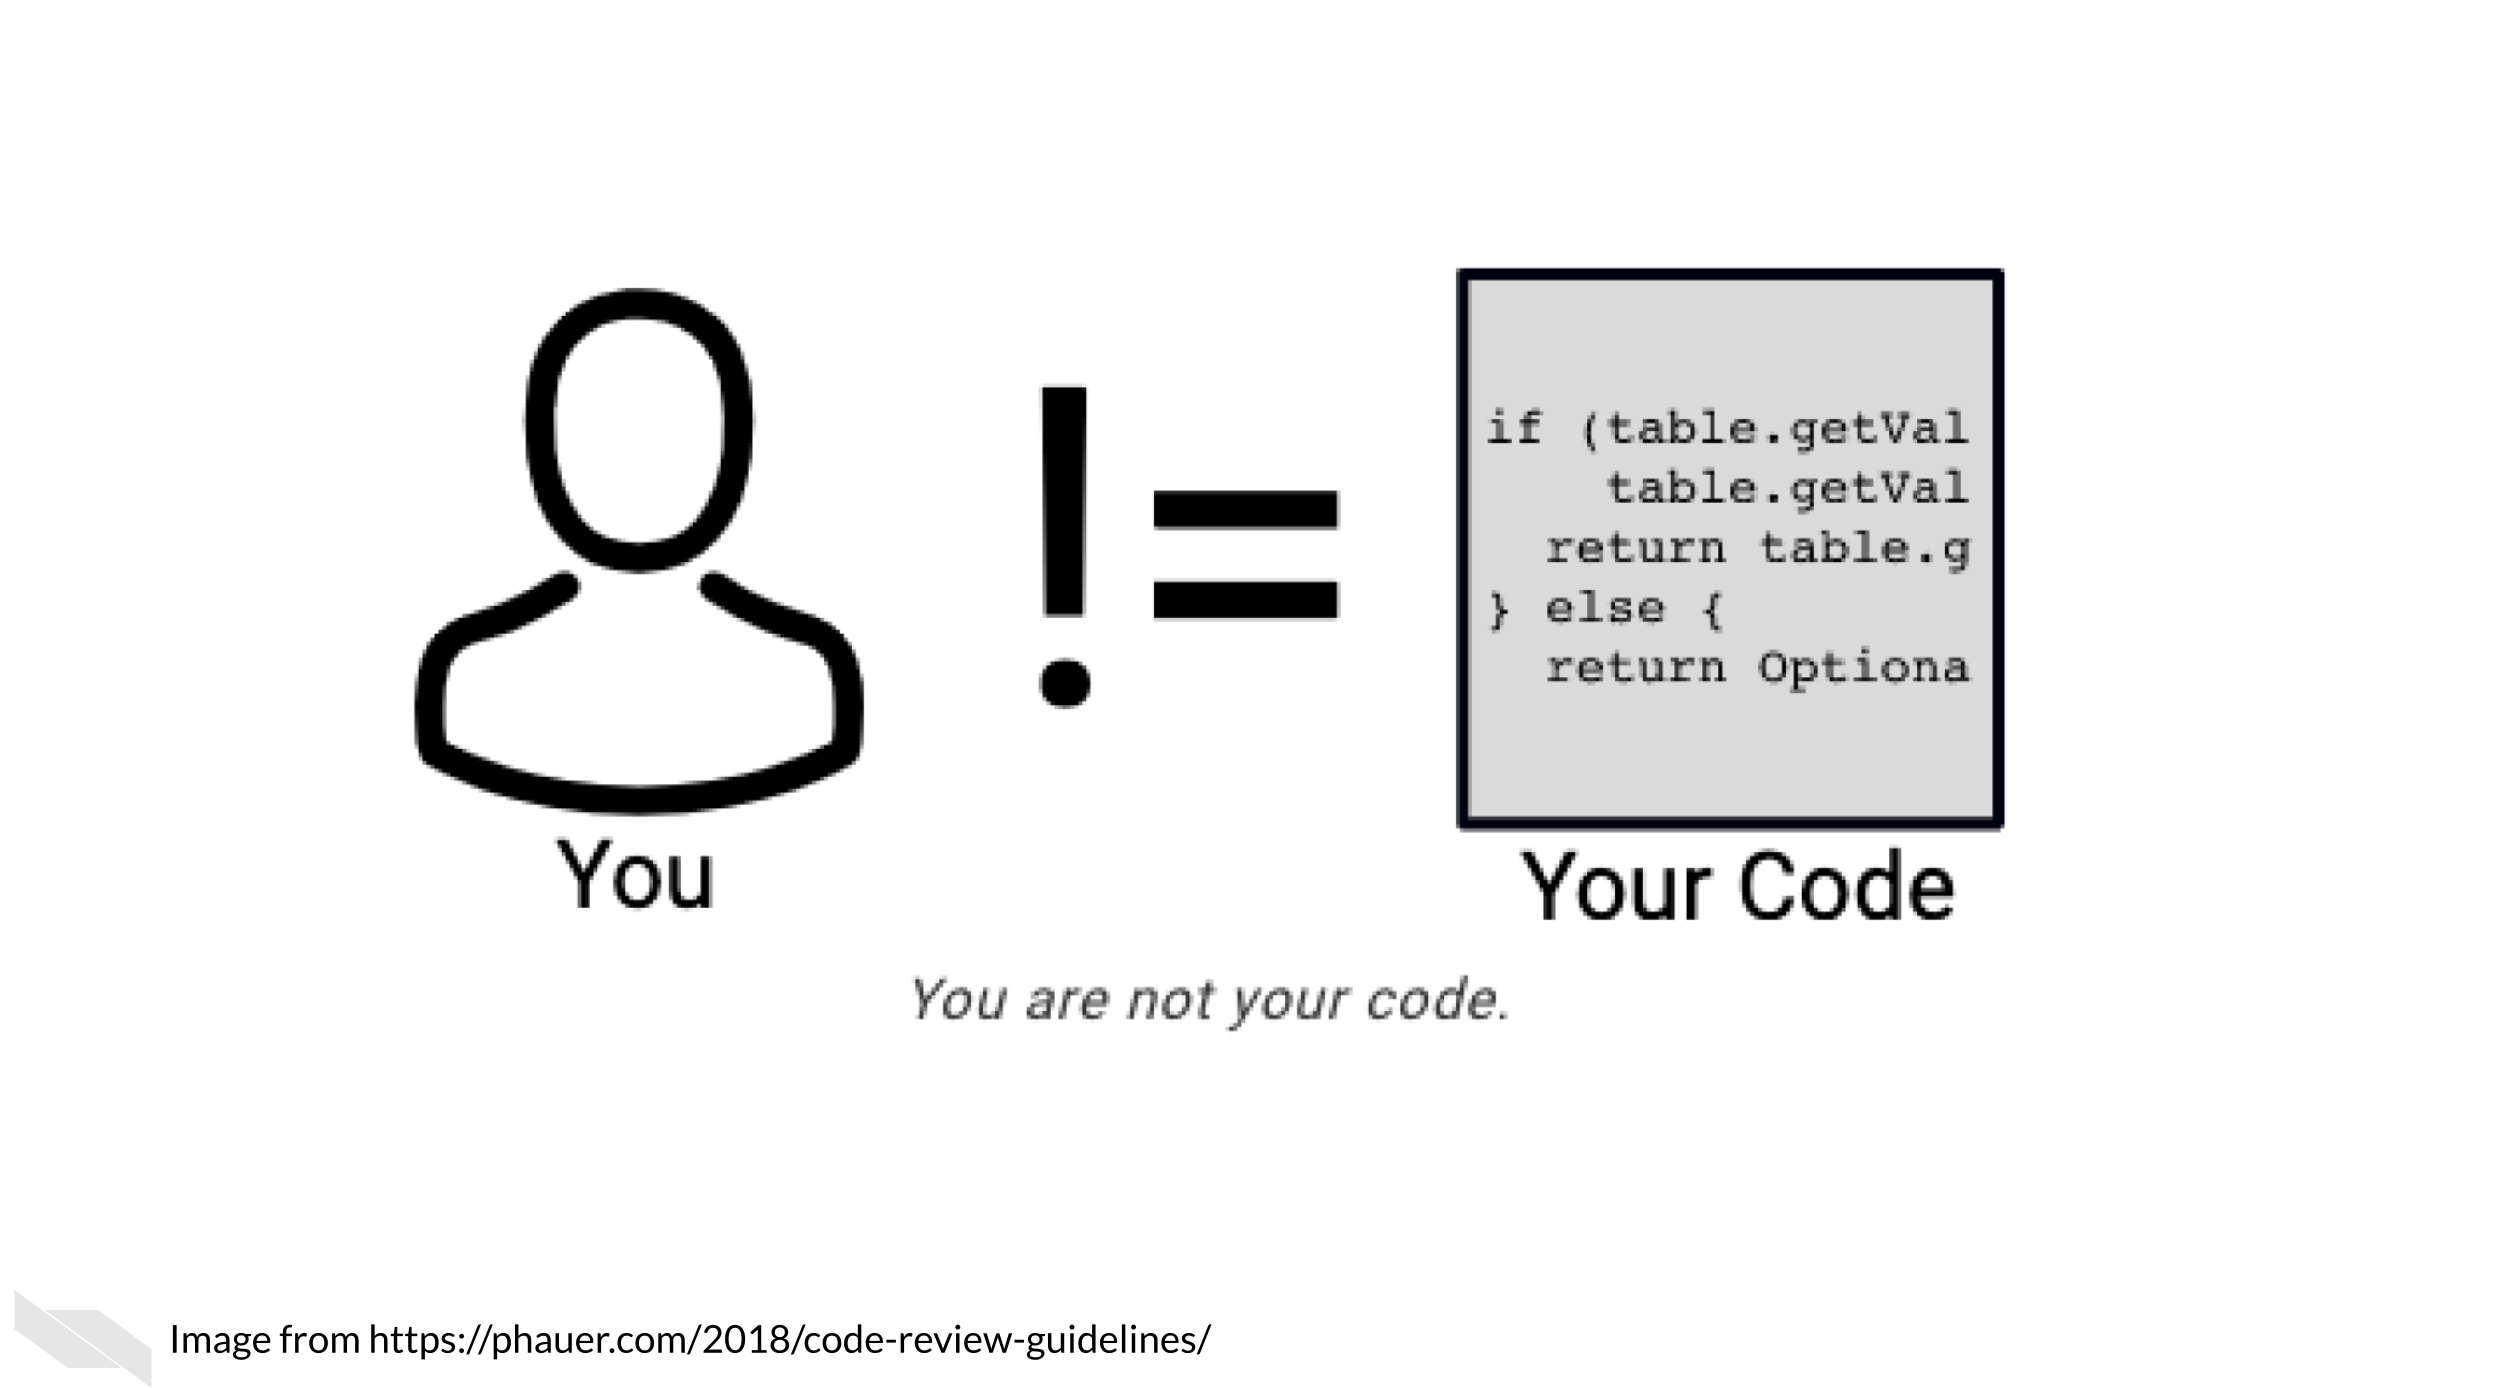 Remember that you are not your code and mistakes are all a part of the process! The cartoon shows you with exclamation point and equal sign with a fake bit of code to illustrate you are not your code.